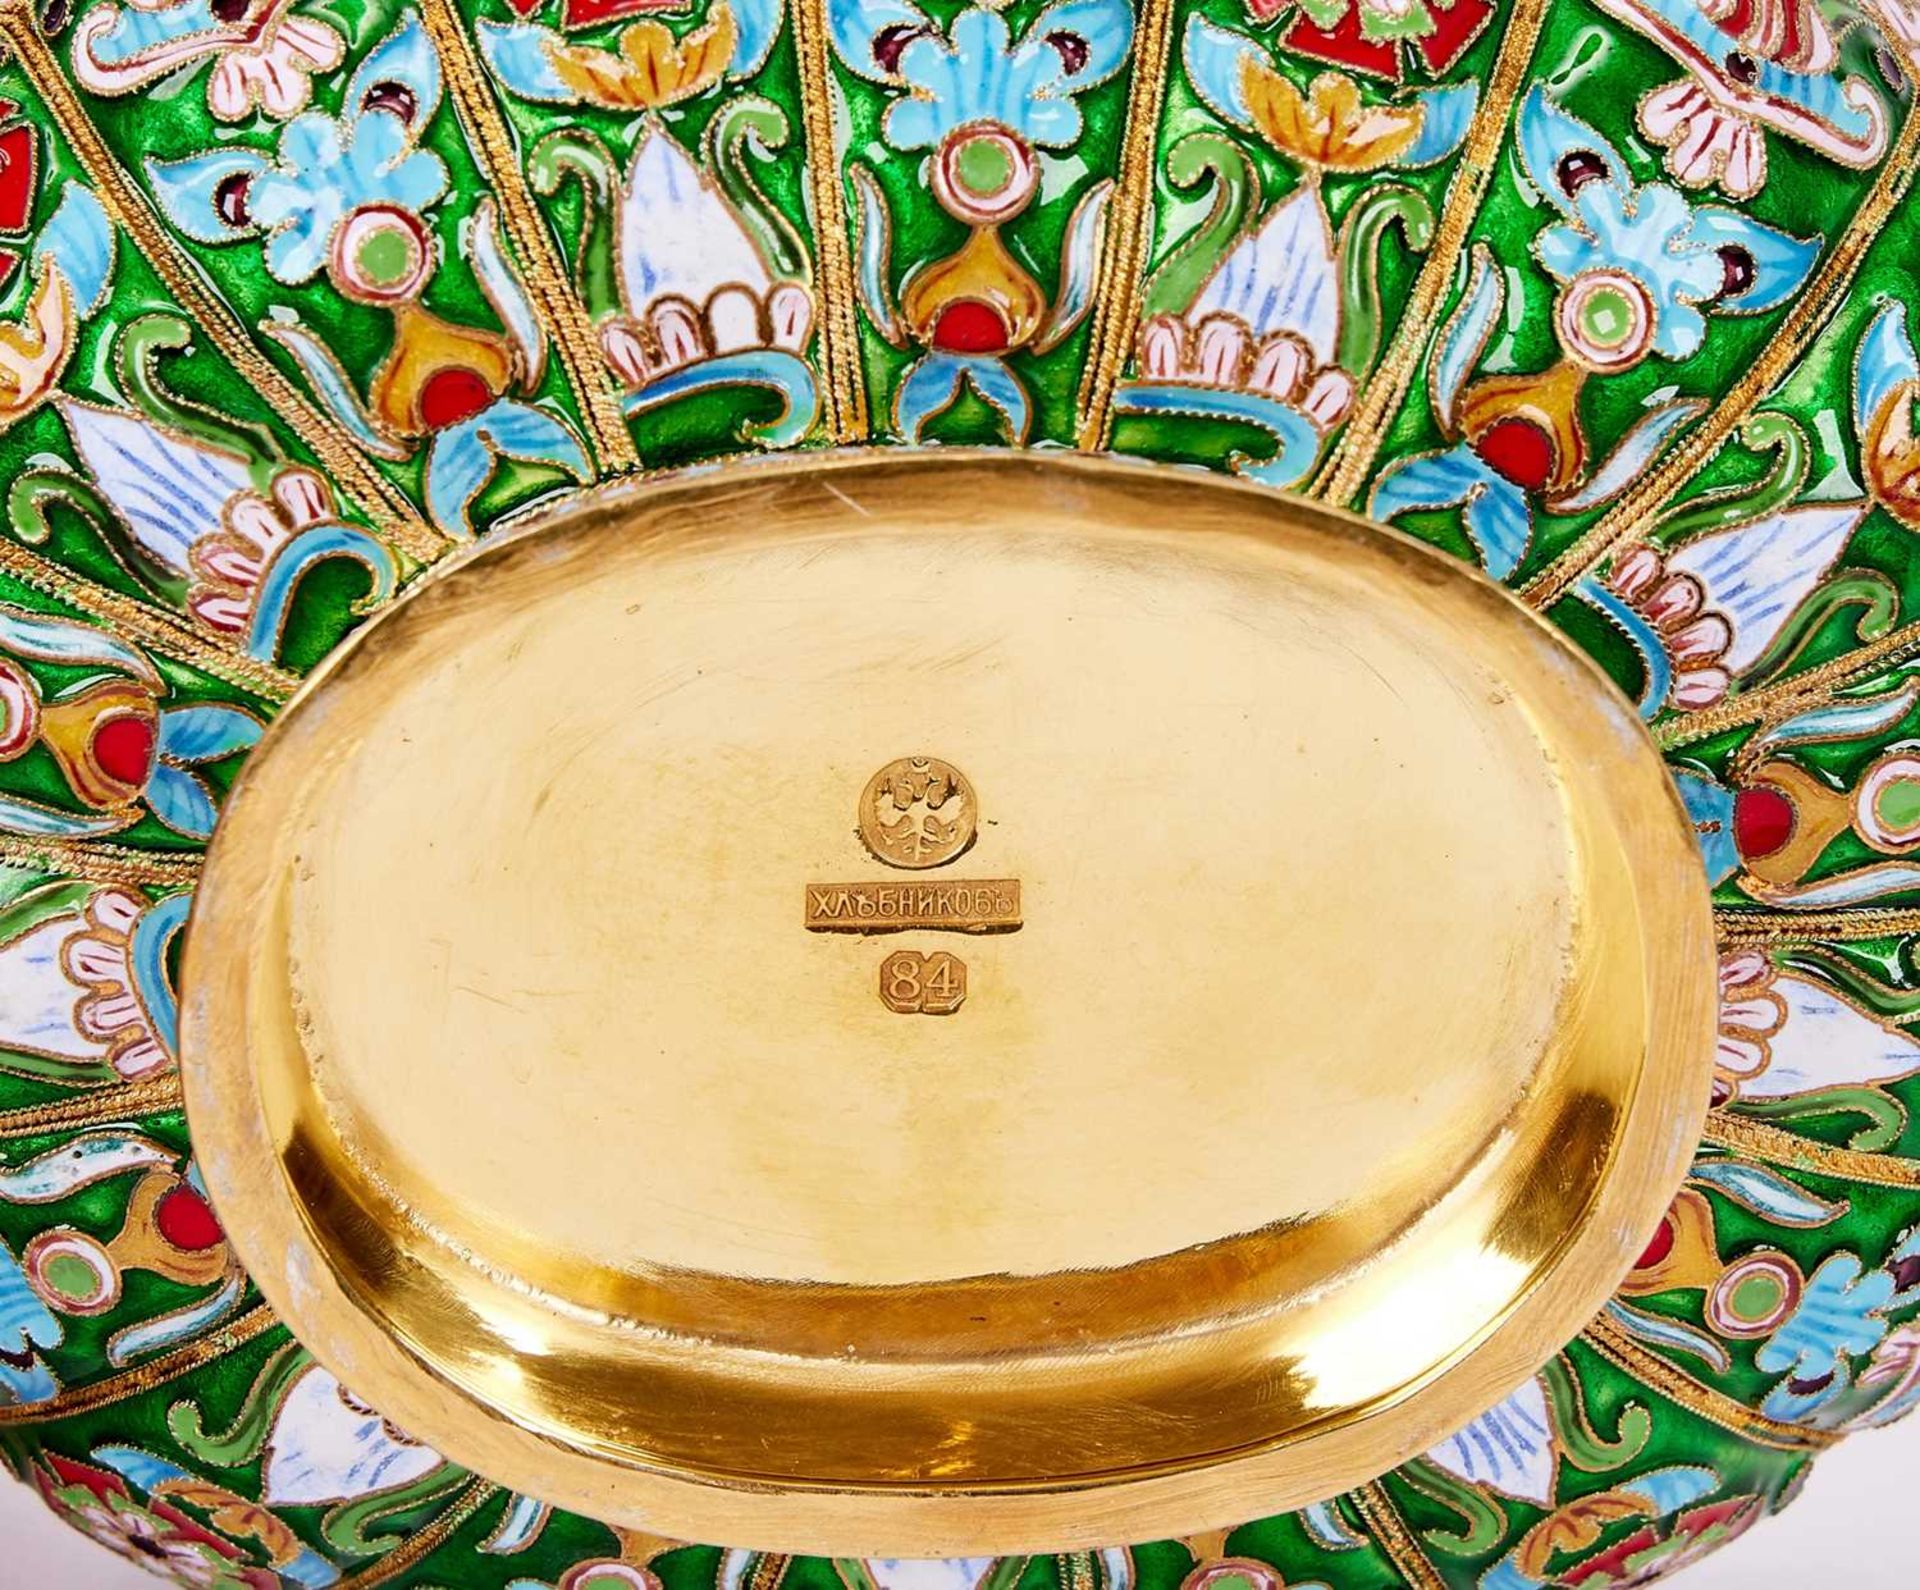 A SILVER GILT, ENAMEL AND GEM SET RUSSIAN STYLE KOVSH - Image 3 of 4